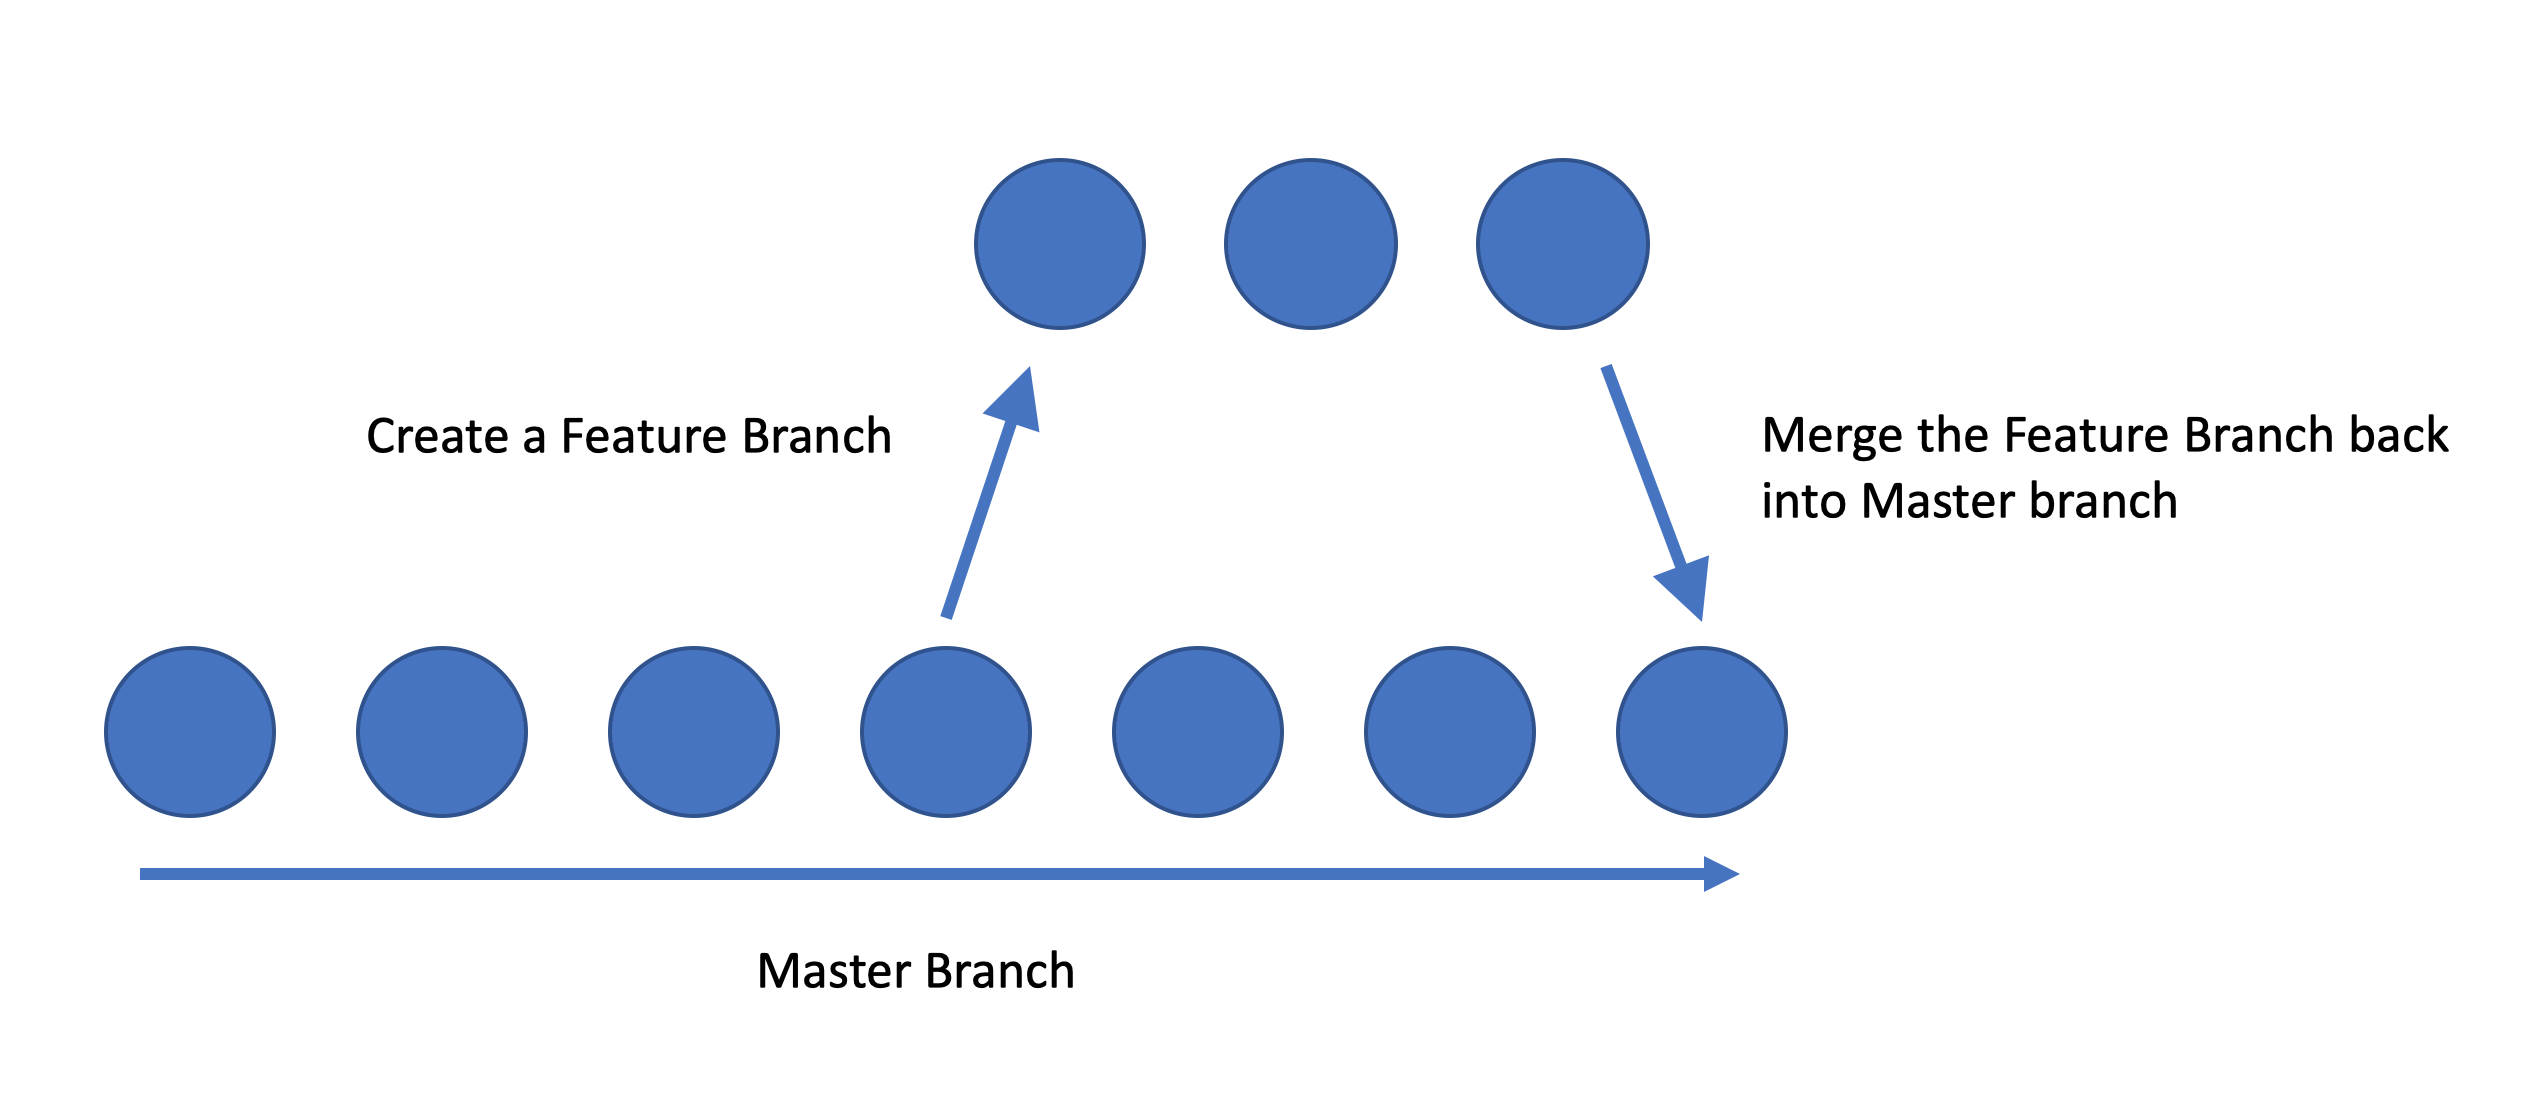 Each circle here represents a commit. At a particular commit, you can split off and create a new branch of work while other people work on the master branch. Then, later, you can merge your work back into the master branch.